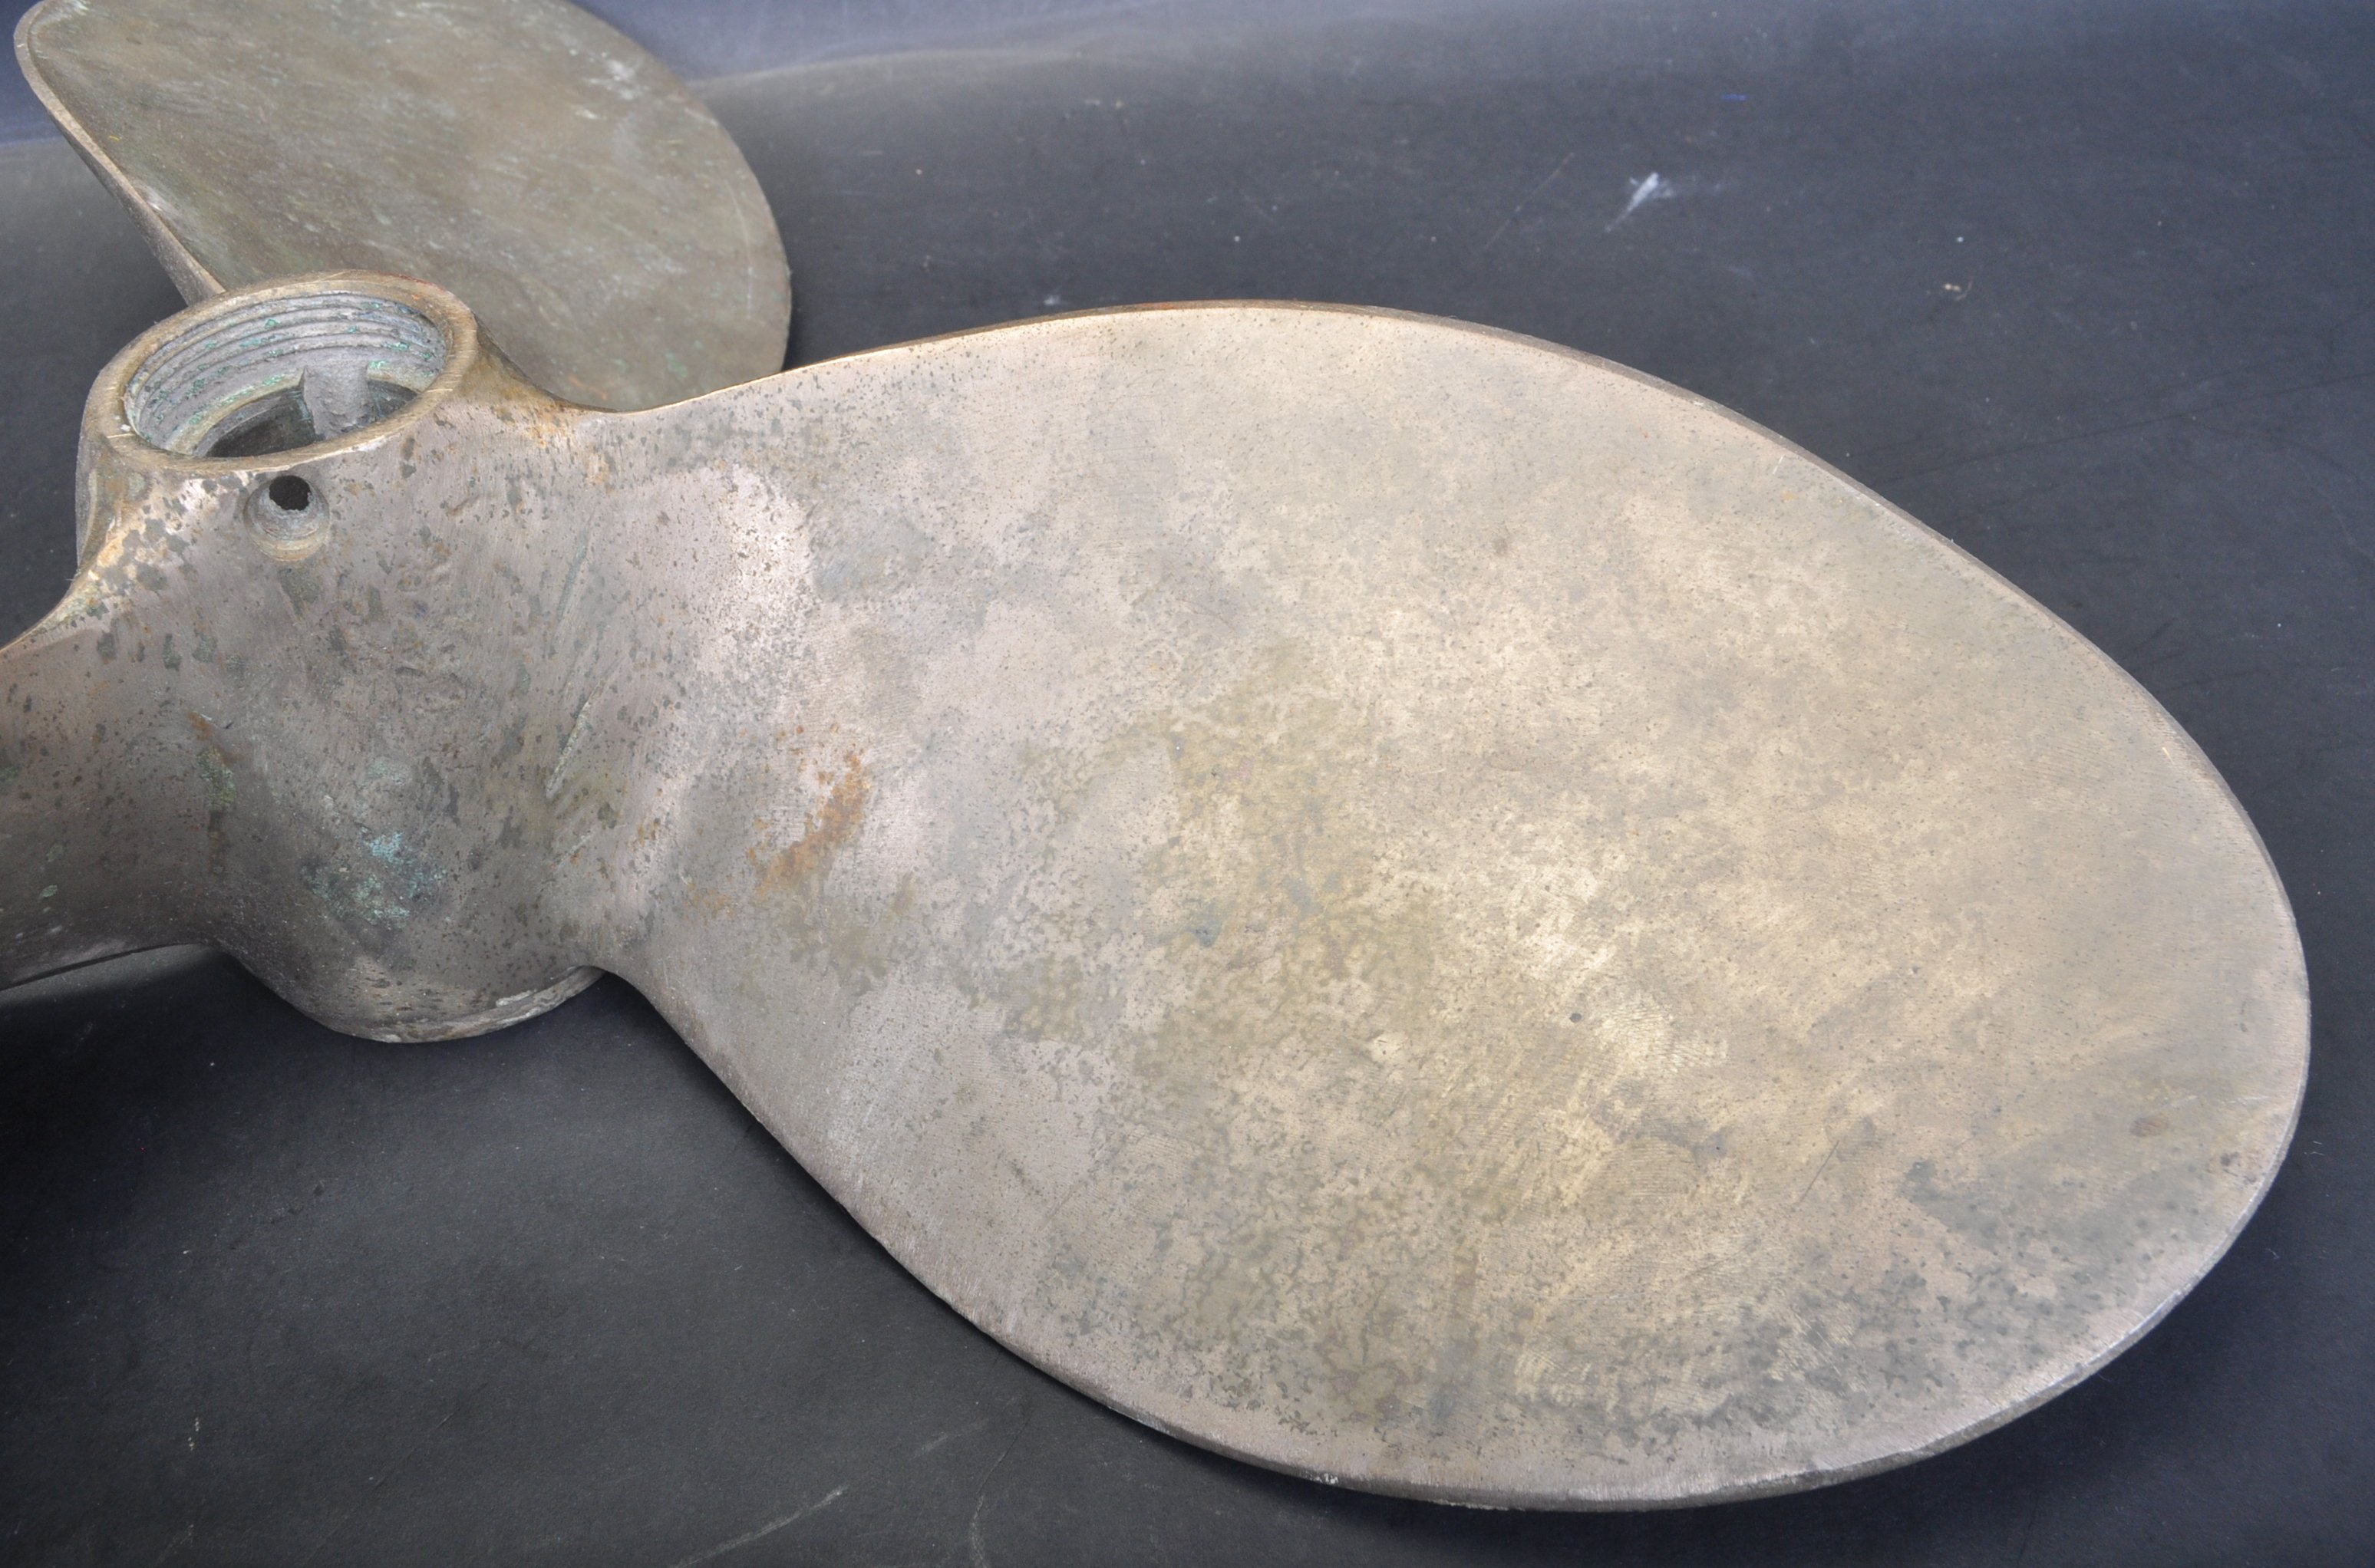 MID 20TH CENTURY SOLID BRONZE BOAT / SHIP PROPELLER - Image 2 of 4